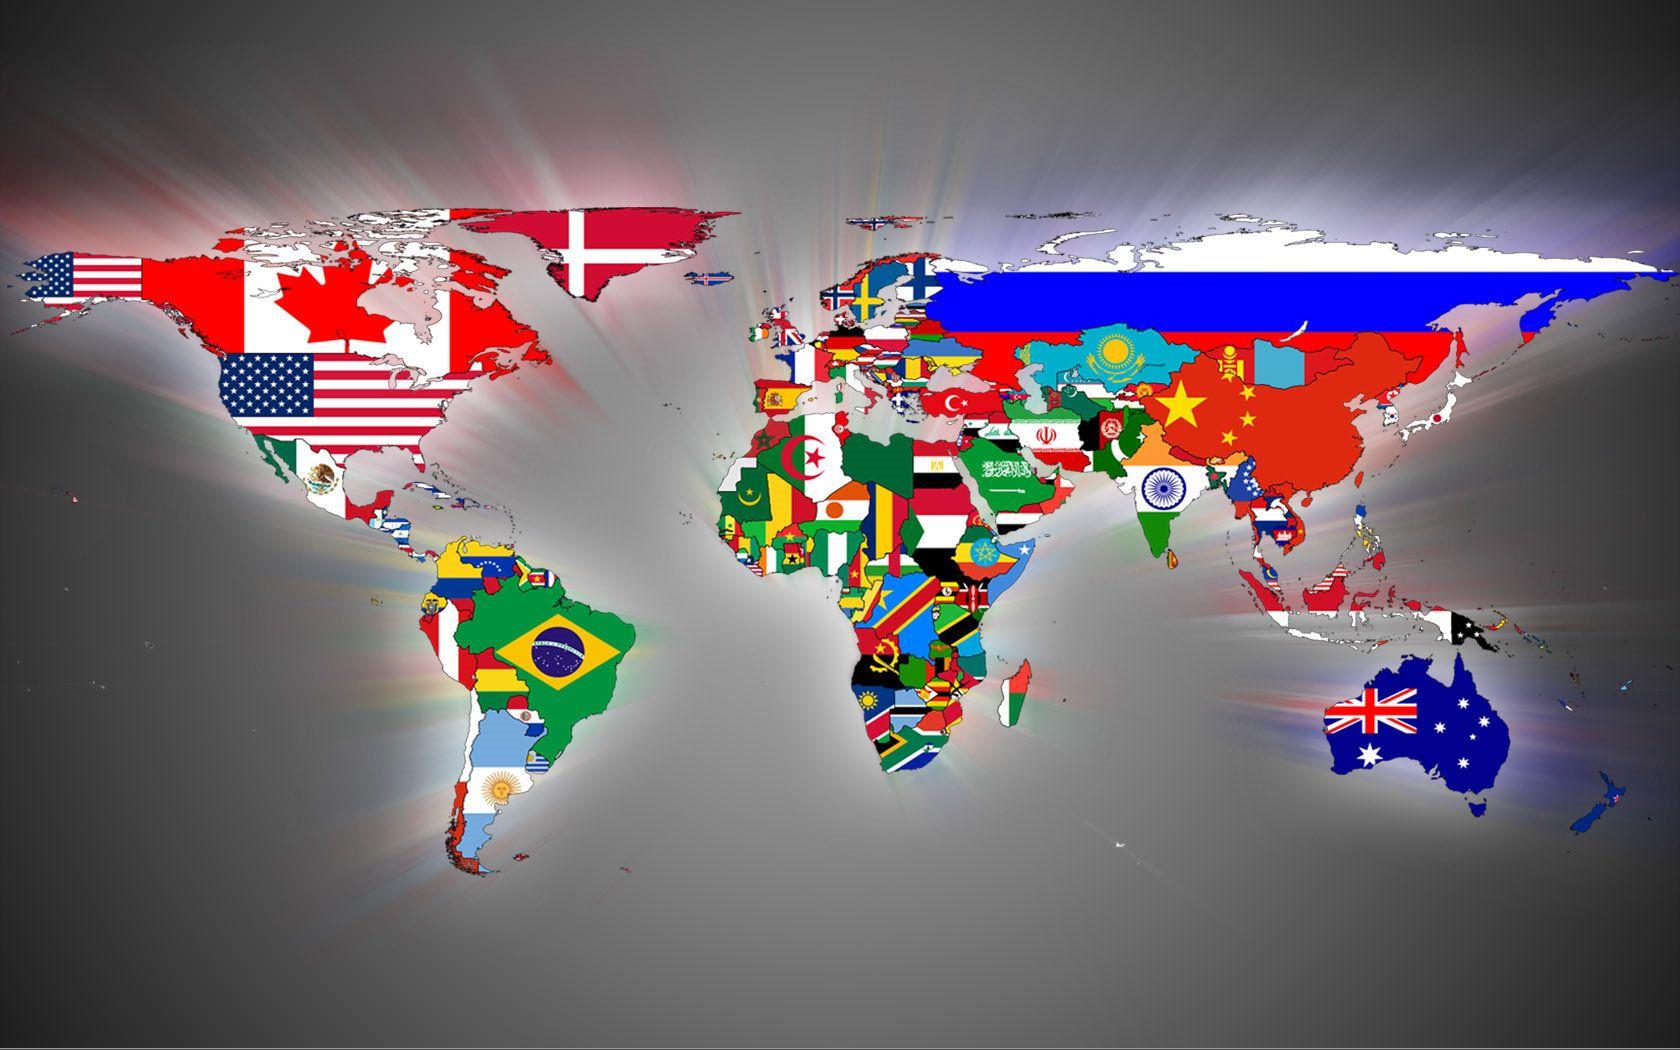 World Flags Wallpapers - Wallpaper Cave